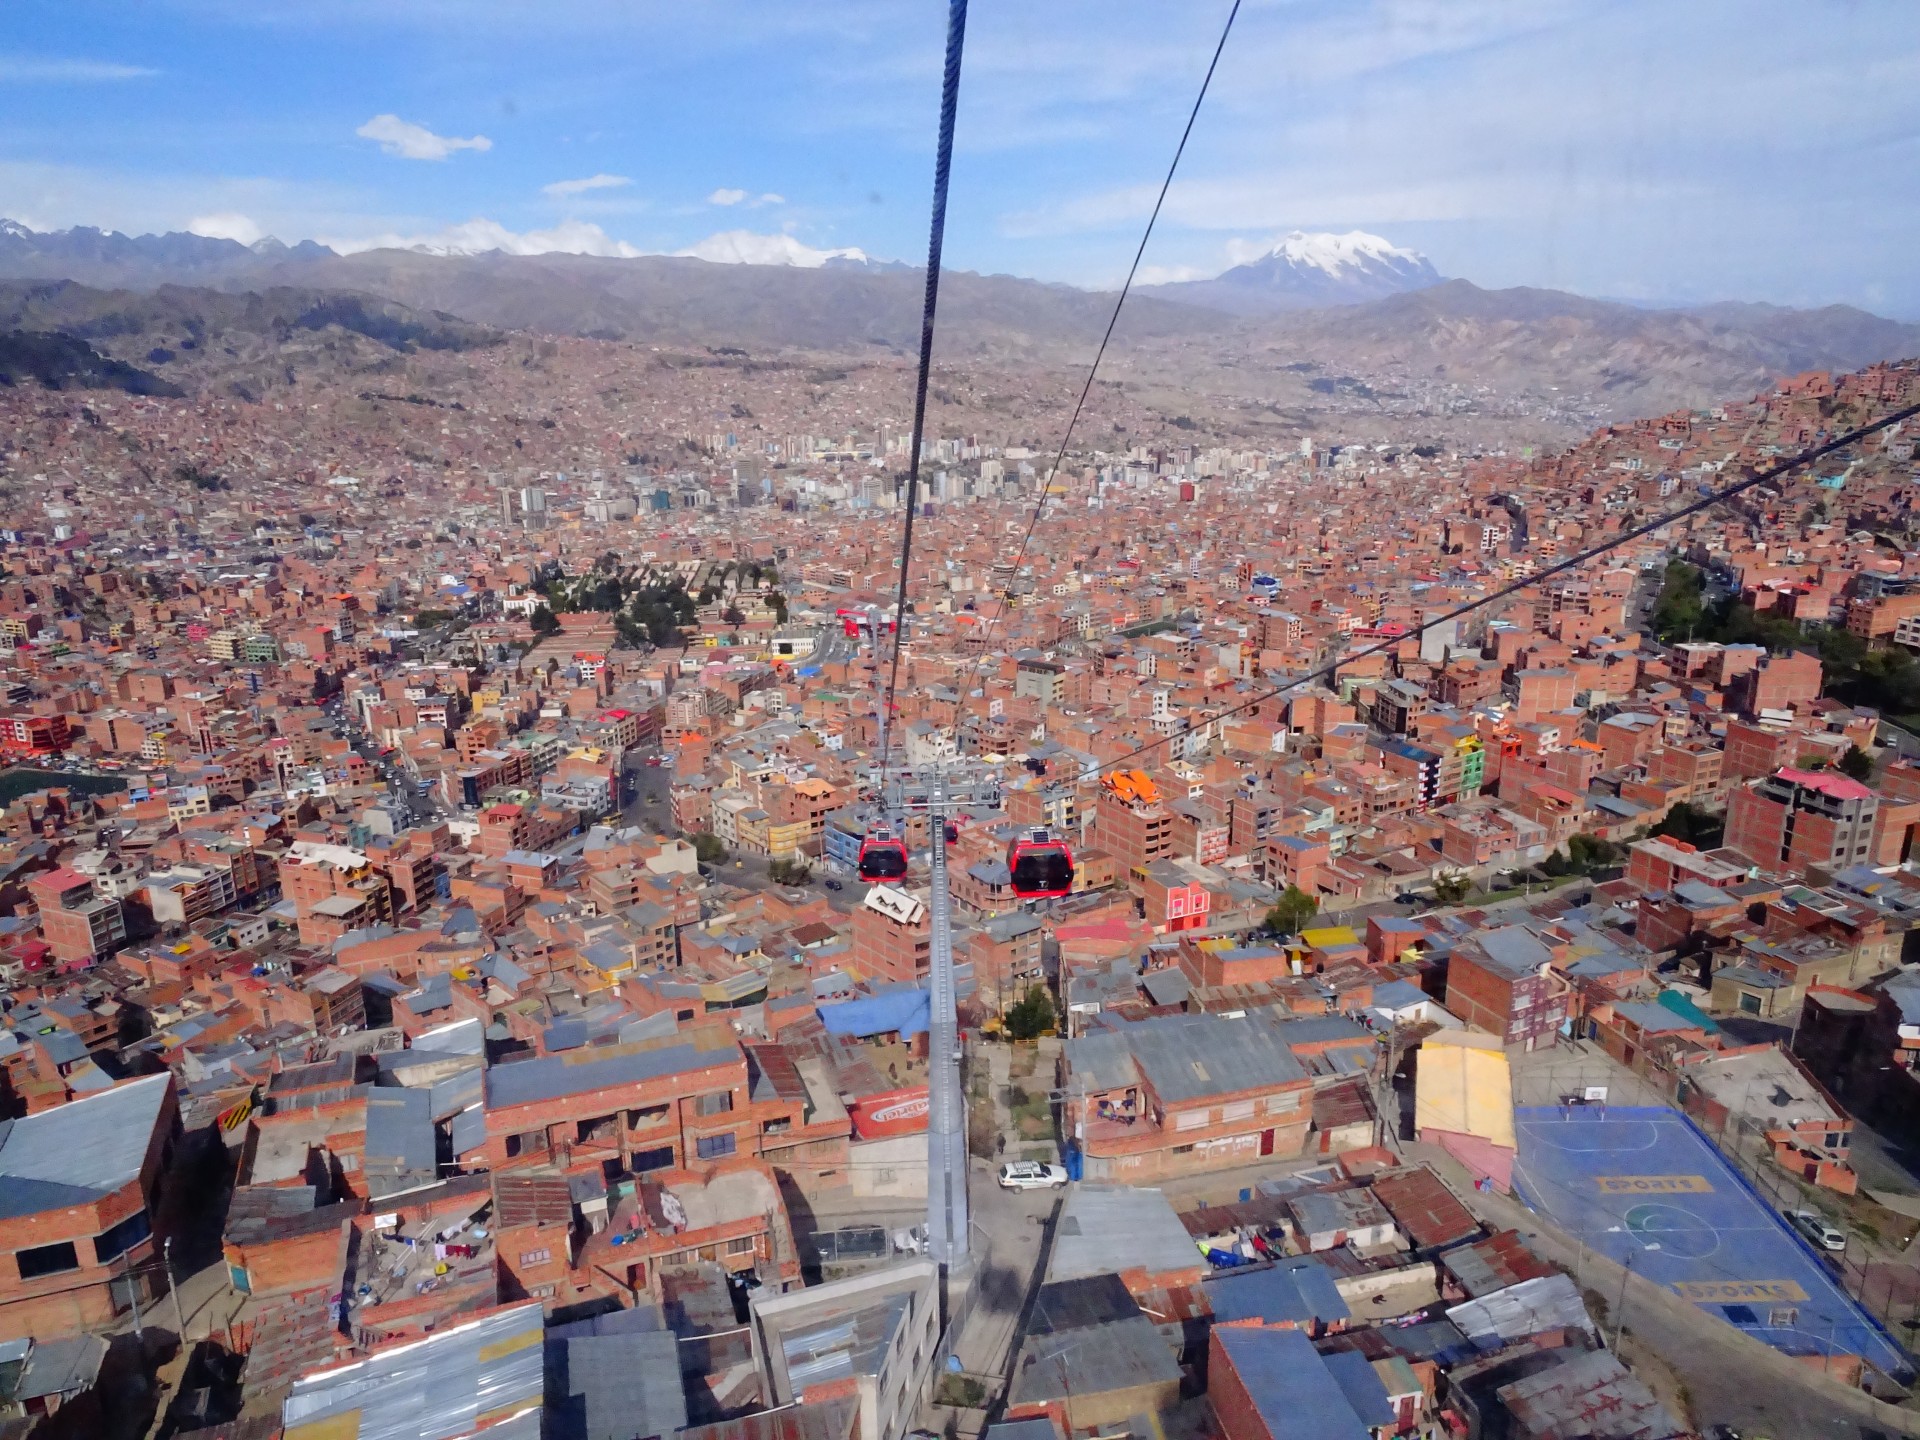 It's remarkably difficult to get all of La Paz in one photograph.